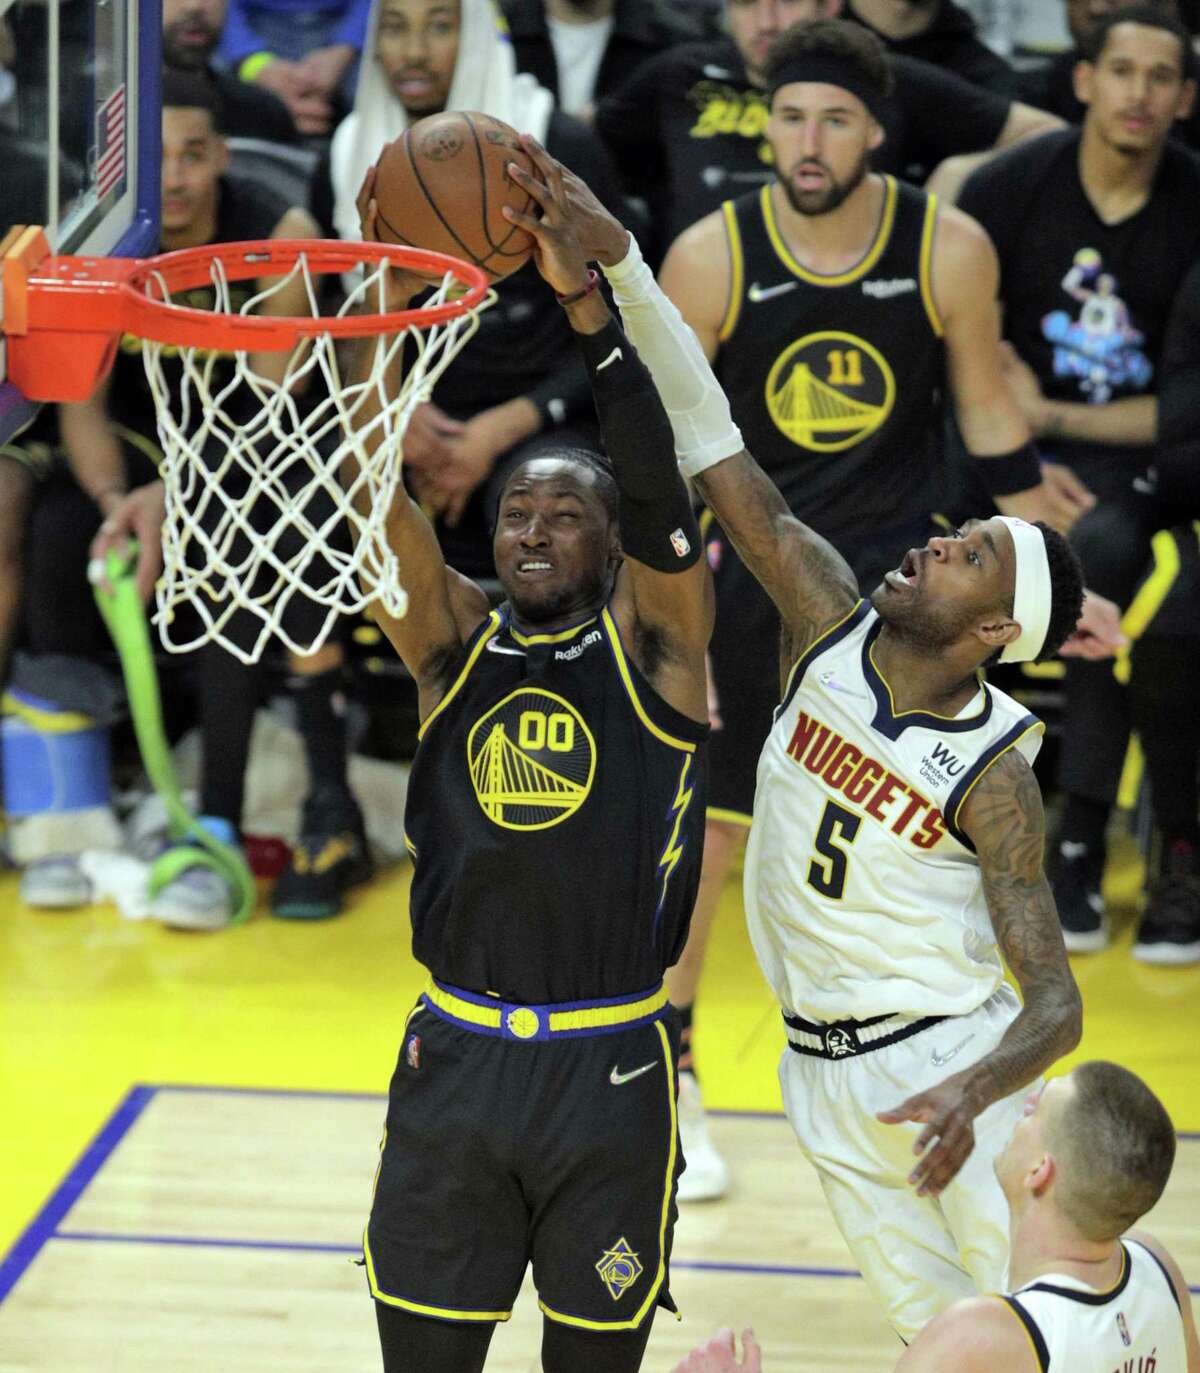 Jonathan Kuminga (00) dunks defended by Monte Morris (Will BArton (5) In the first half as the Golden State Warriors played the Denver Nuggets in Game 5 of the first round of the NBA Playoffs at Chase Center in San Francisco, Calif., on Wednesday, April 27, 2022.